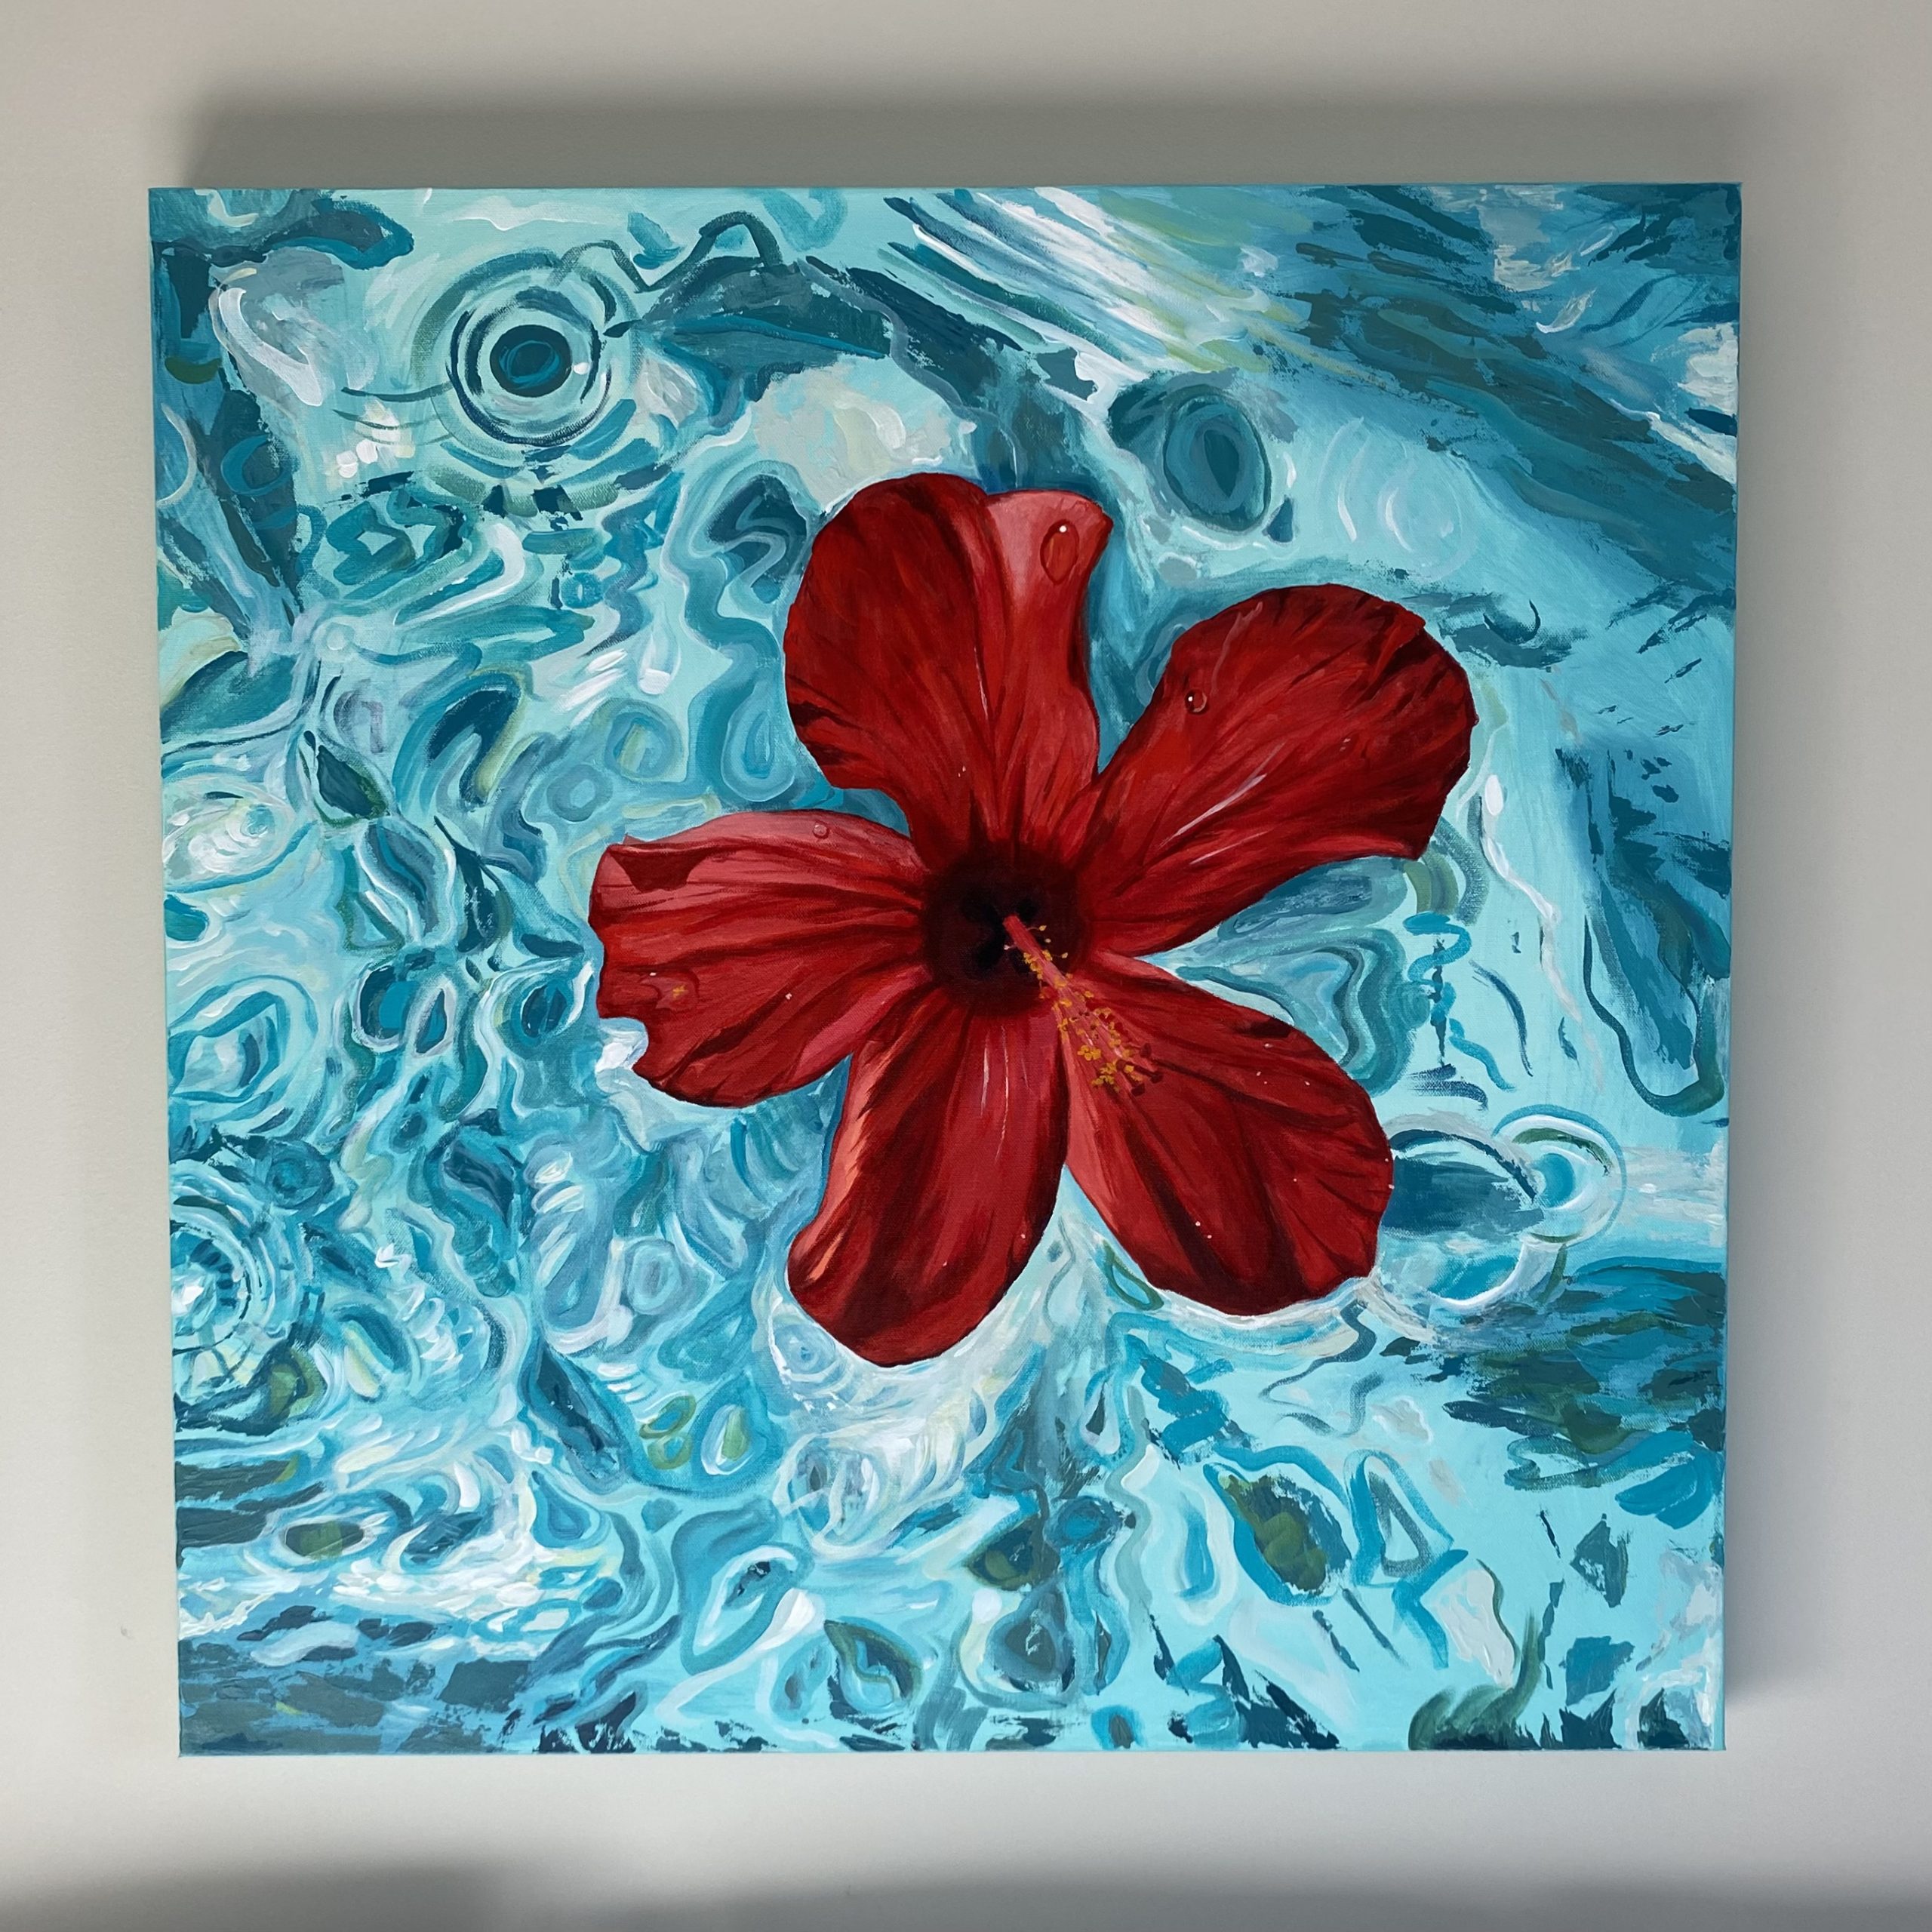 Painting of a hibiscus flower floating in water